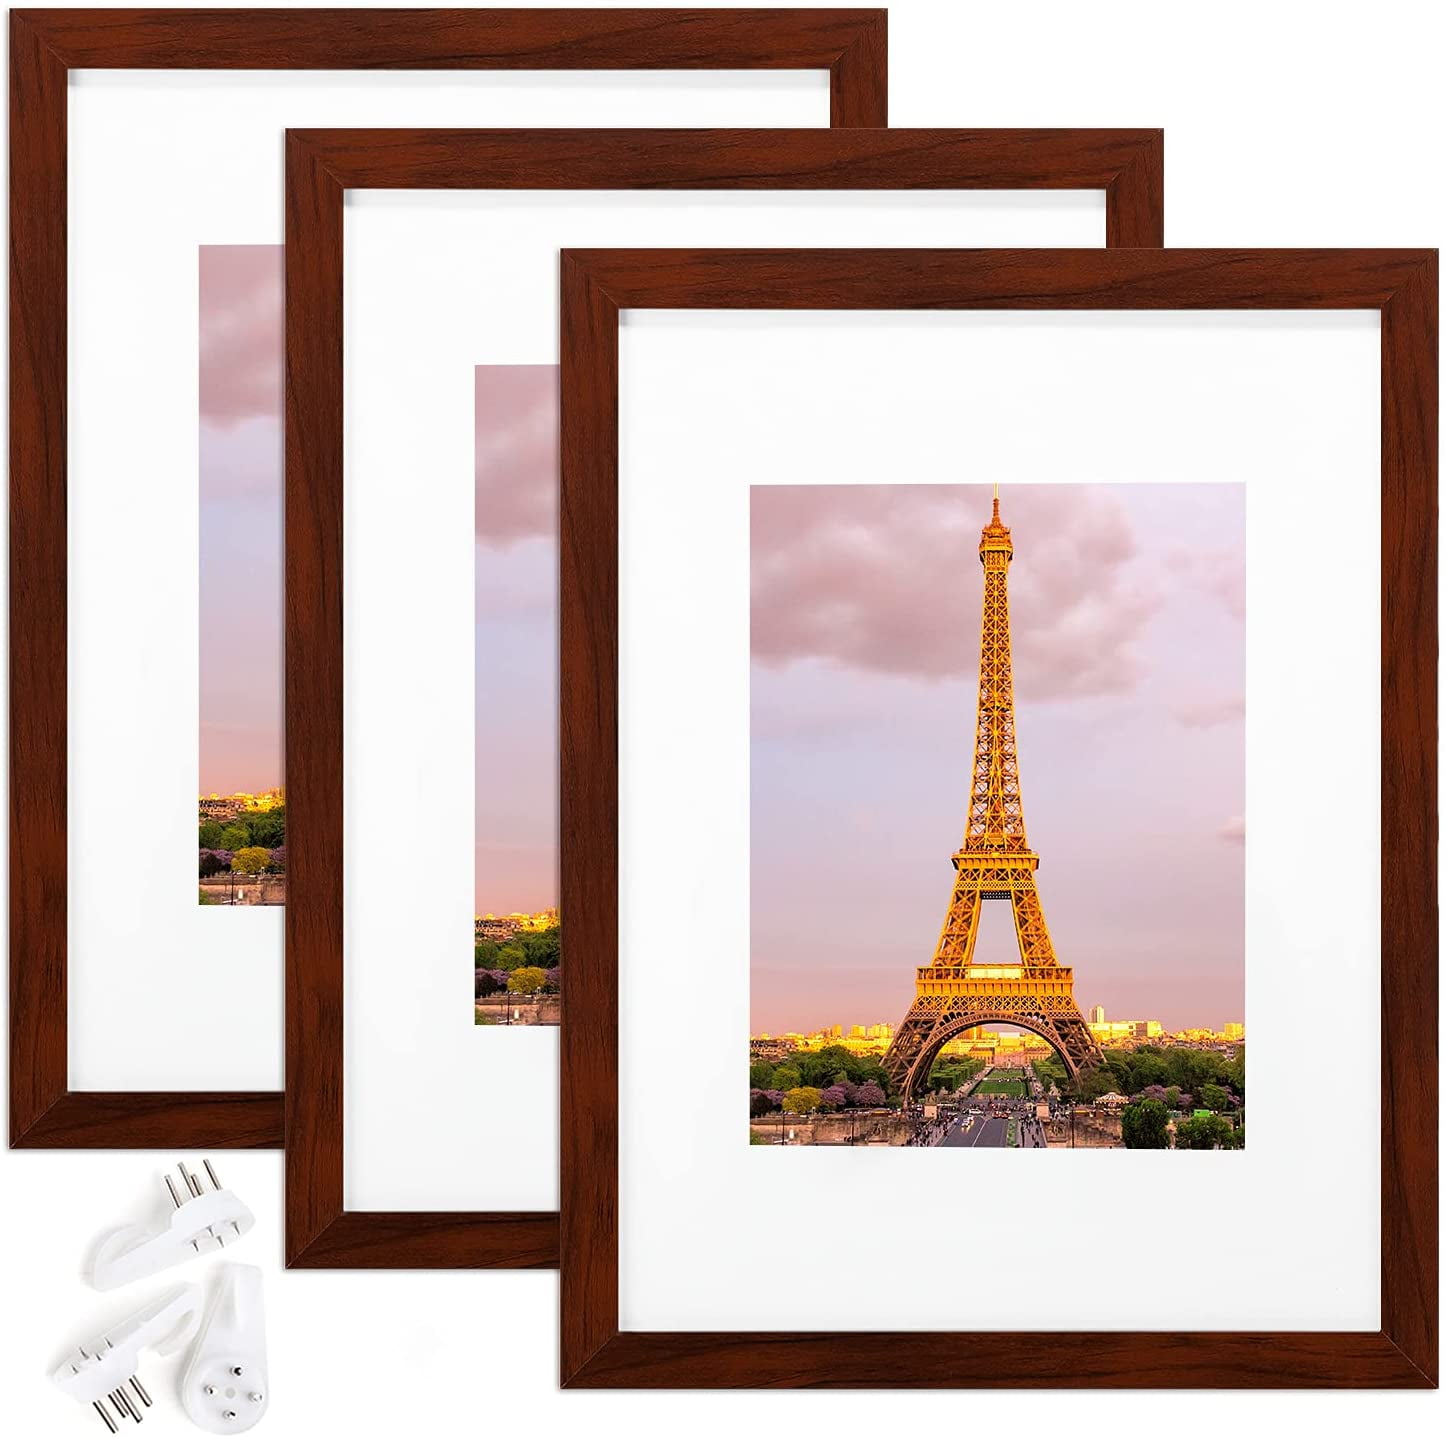 Mahogony multi hole picture frame for 8x6 photos 